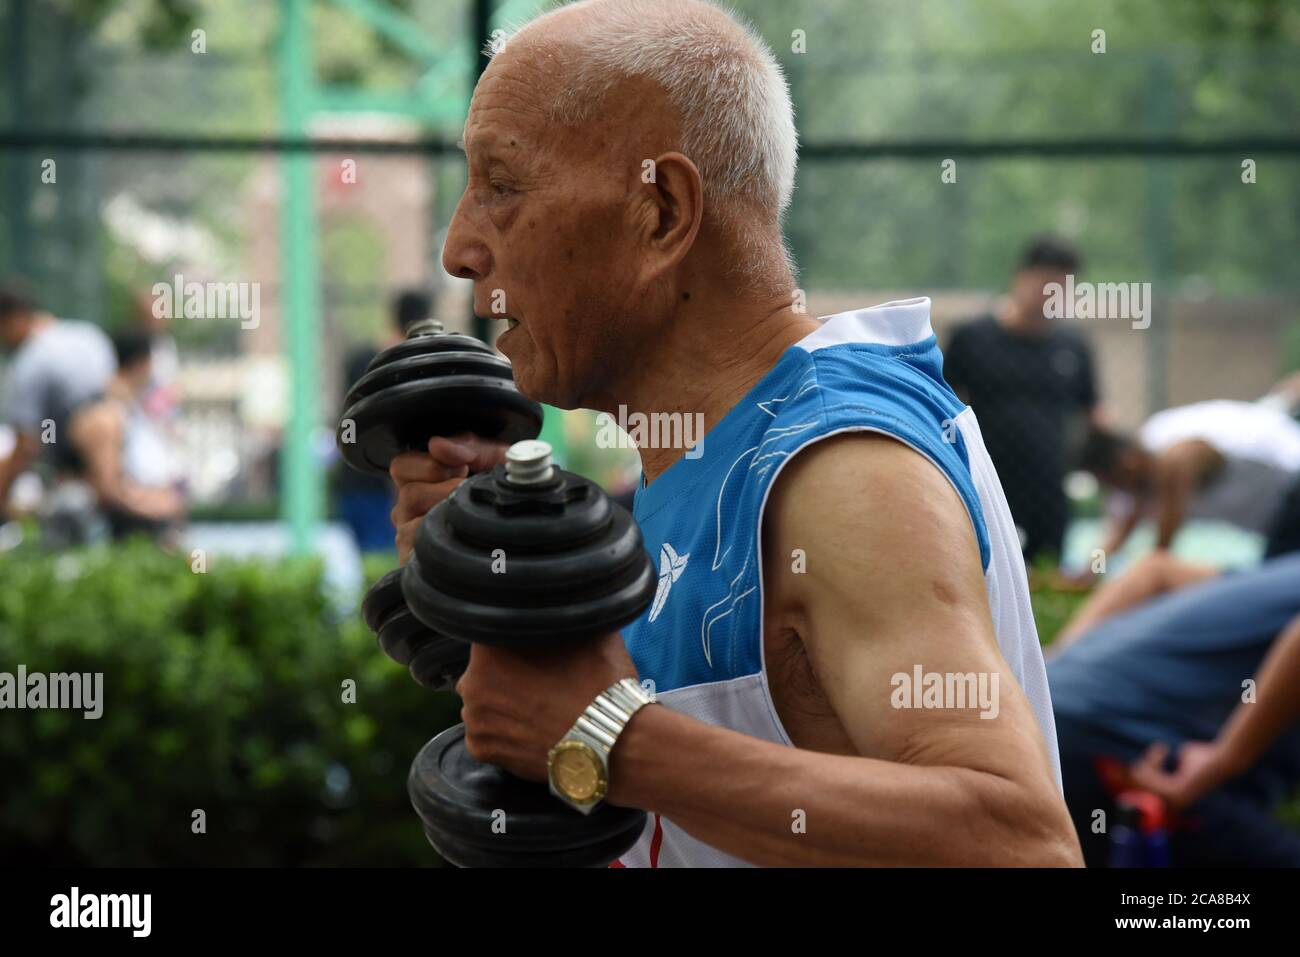 (200805) -- JINAN, Aug. 5, 2020 (Xinhua) -- Li Chunfu, 92, life dumbells before baksetball training at an outdoor basketball court in Jinan, east China's Shandong Province, Aug. 5, 2020. As the oldest member of Jinan Senior Basketball Team which was founded in 2012, Li Chunfu has been playing basketball in his daily routine since 1949. Now in his 90s, Li practises basketball skills such as dribbling, layuping and shooting for 30 to 40 minutes on average a day. 'Fitness requires consistency and regularity. Playing basketball and weight training make me maintain a good physical and mental state. Stock Photo